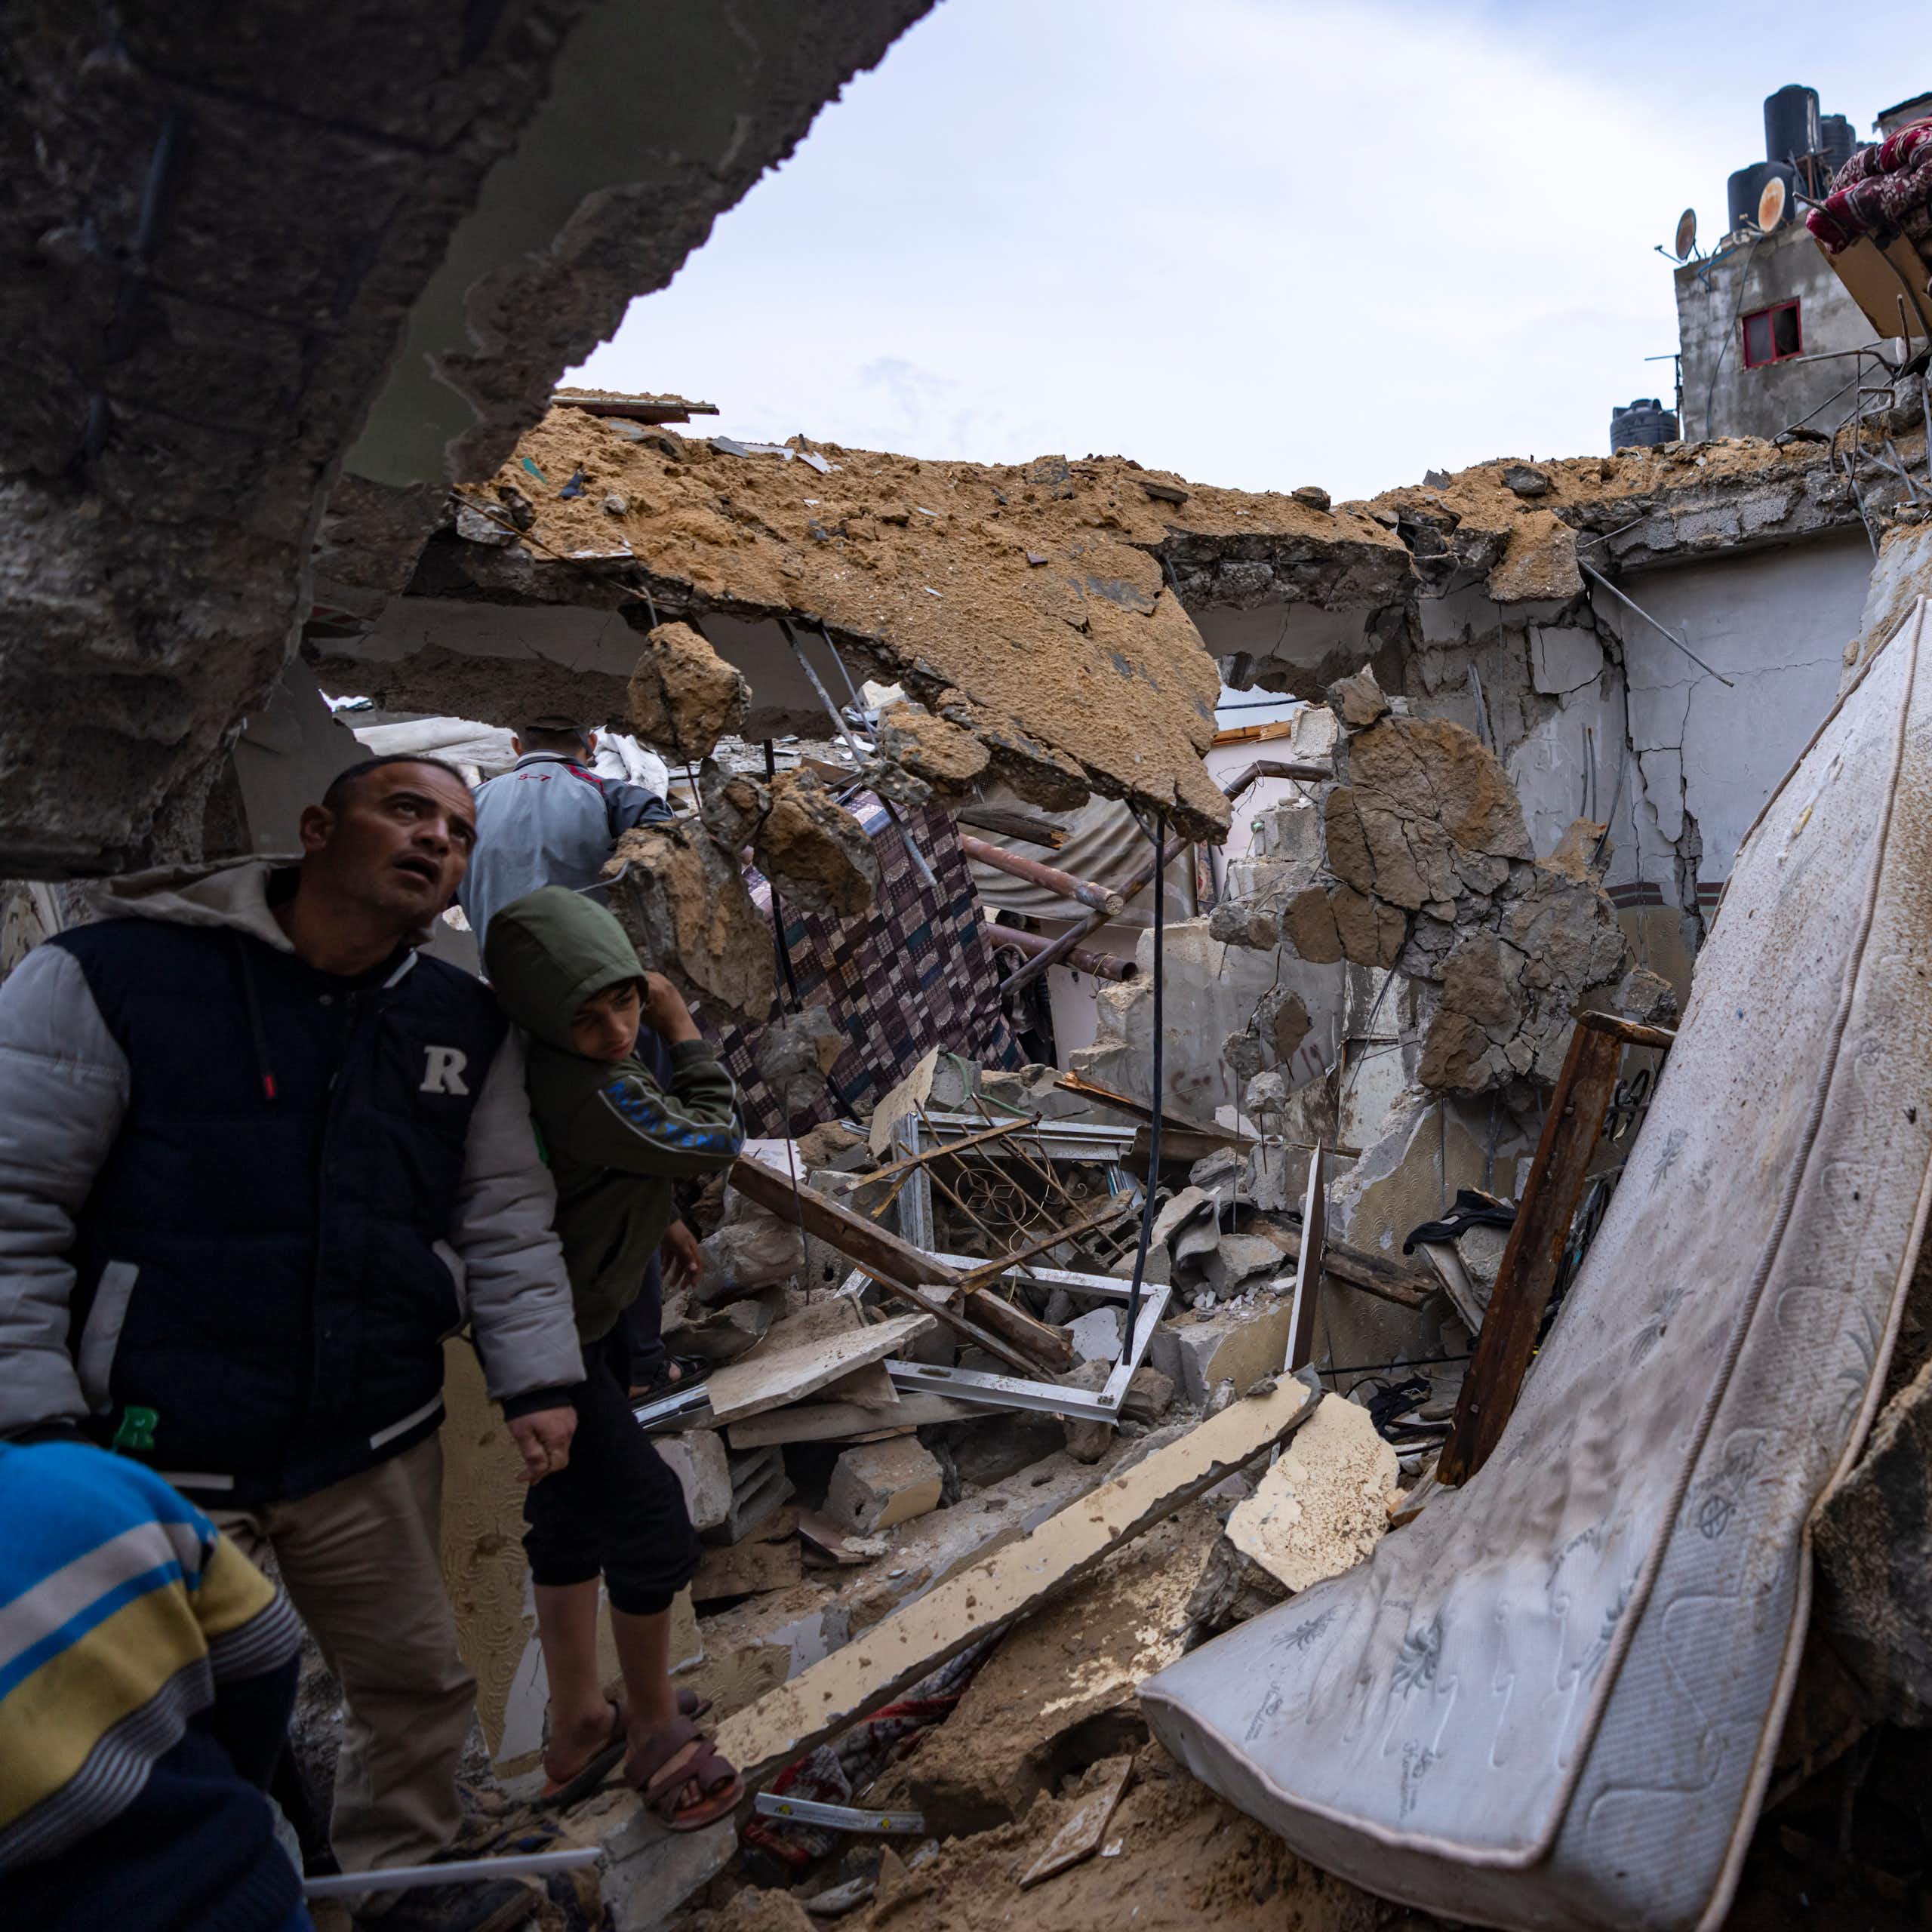 People look over a destroyed home; a mattress is visible amid the rubble.